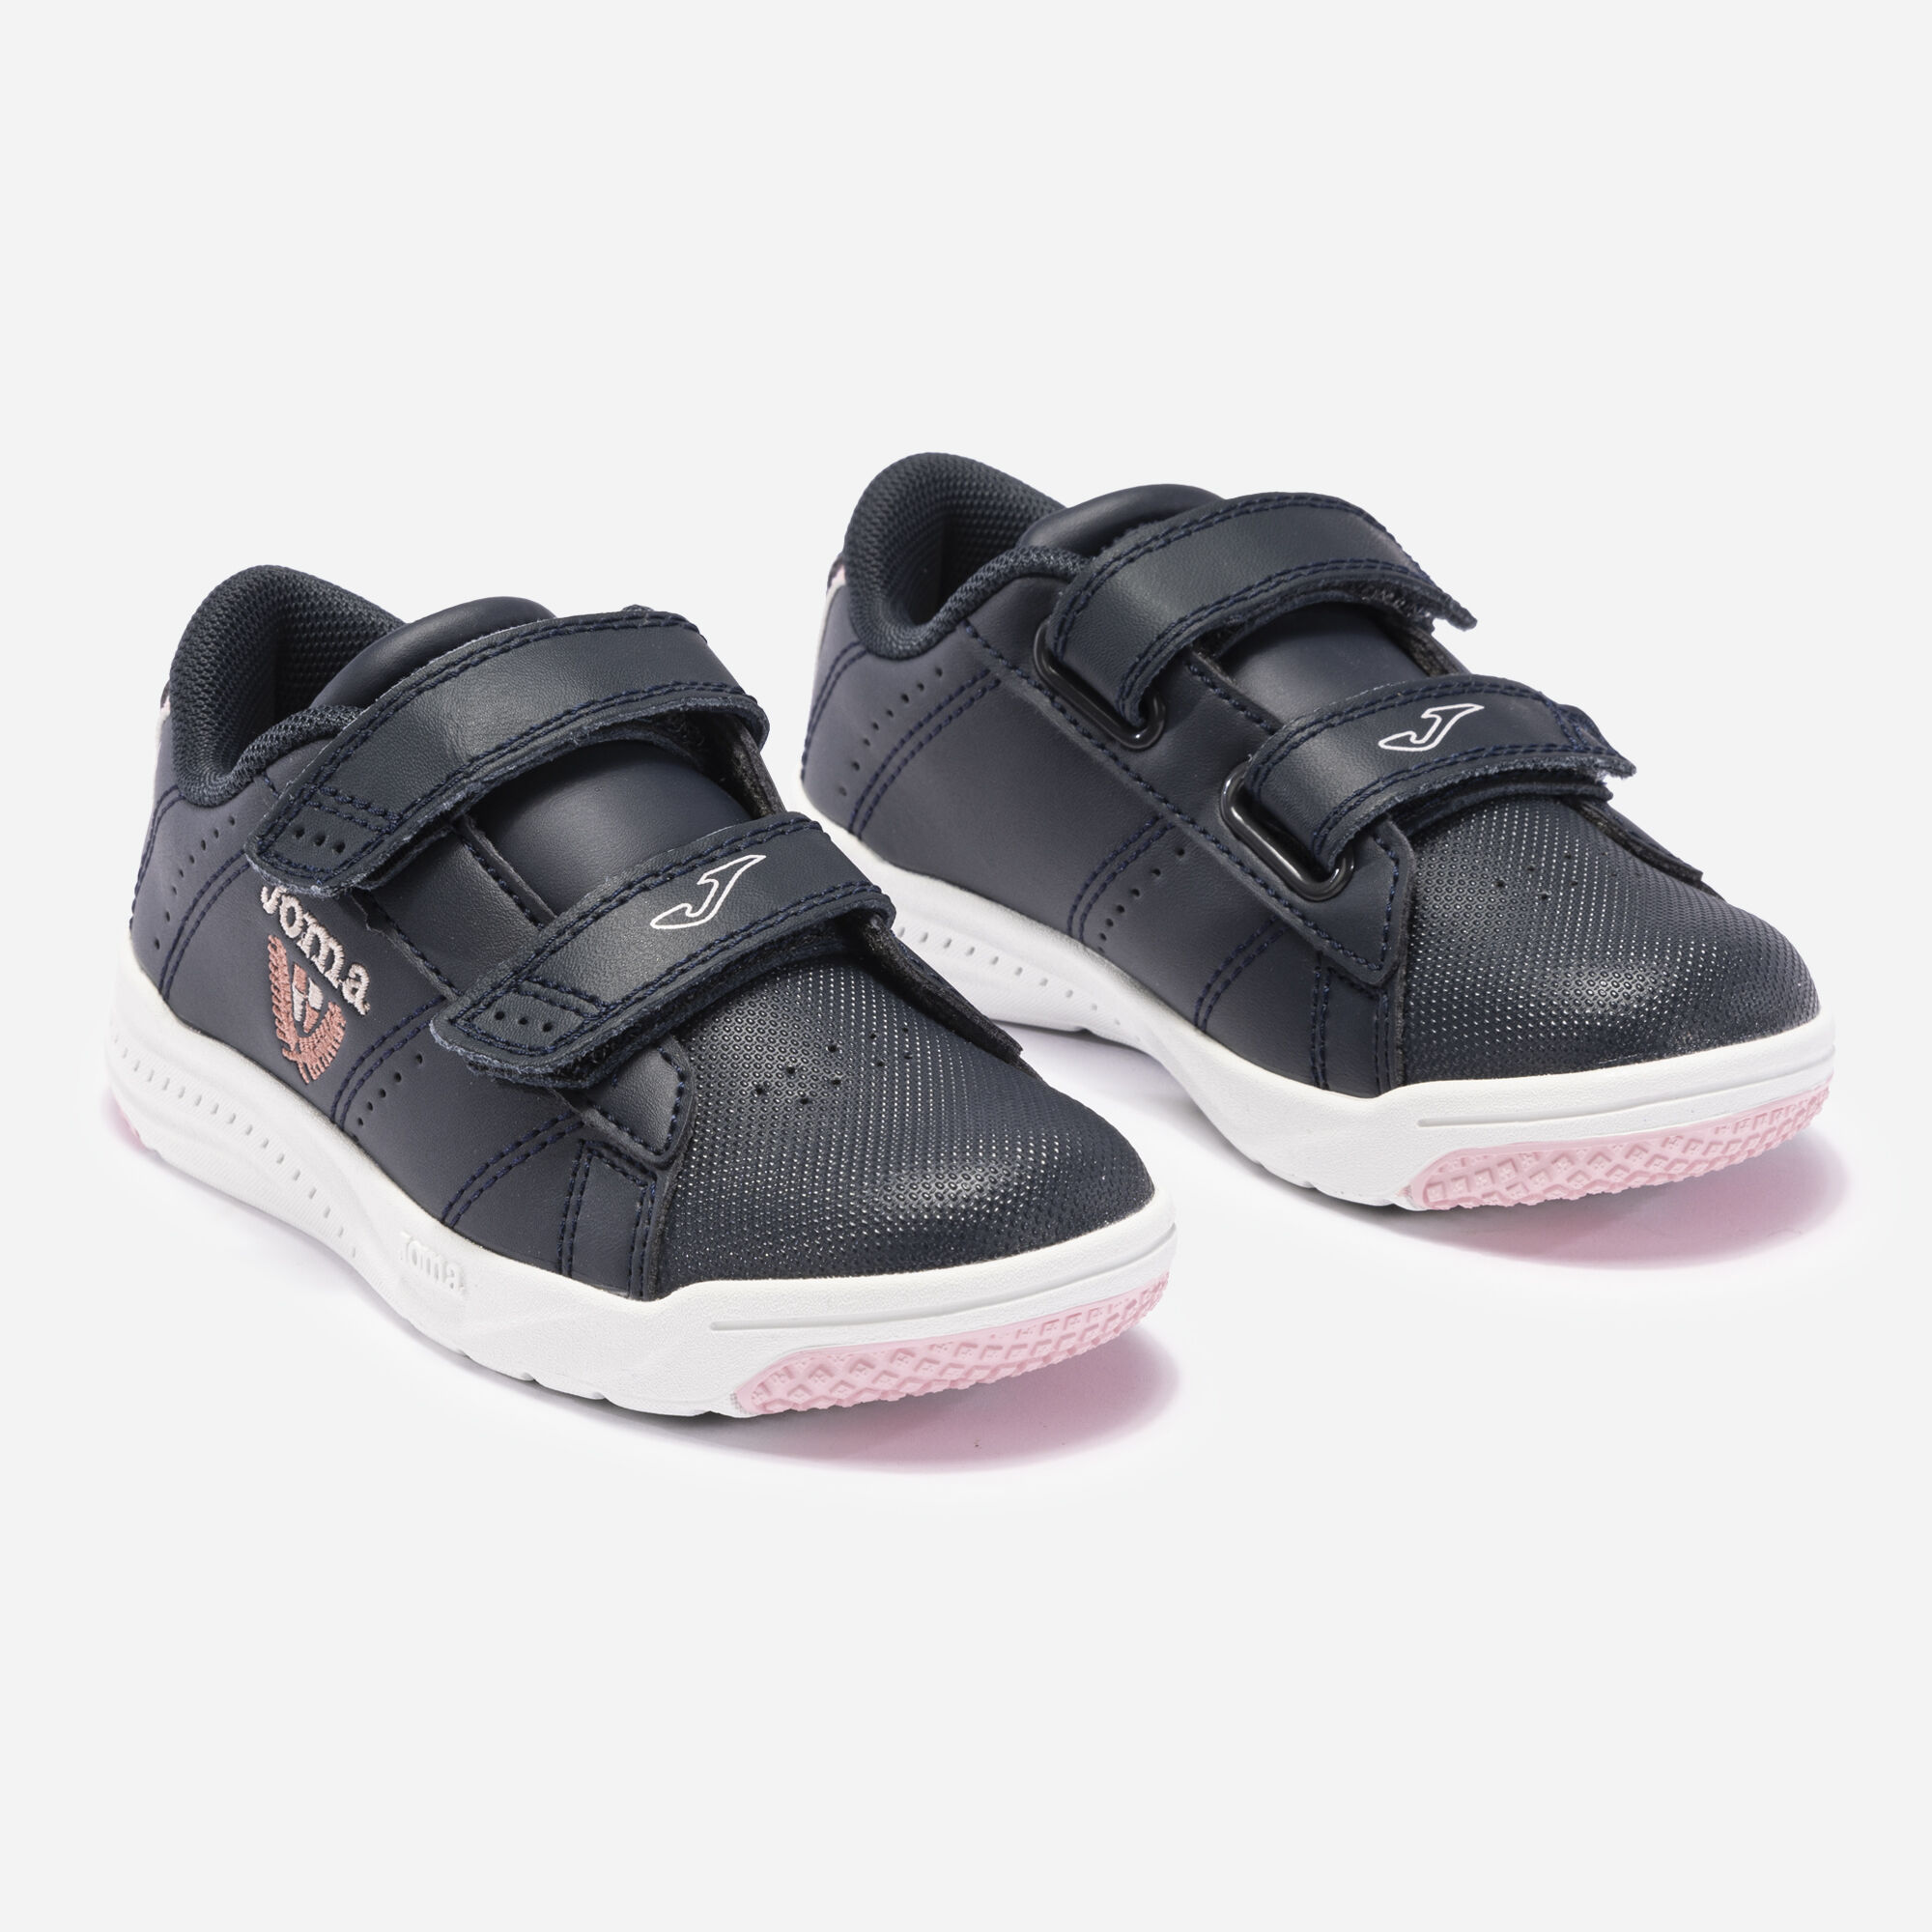 Casual shoes Play 22 junior navy blue pink